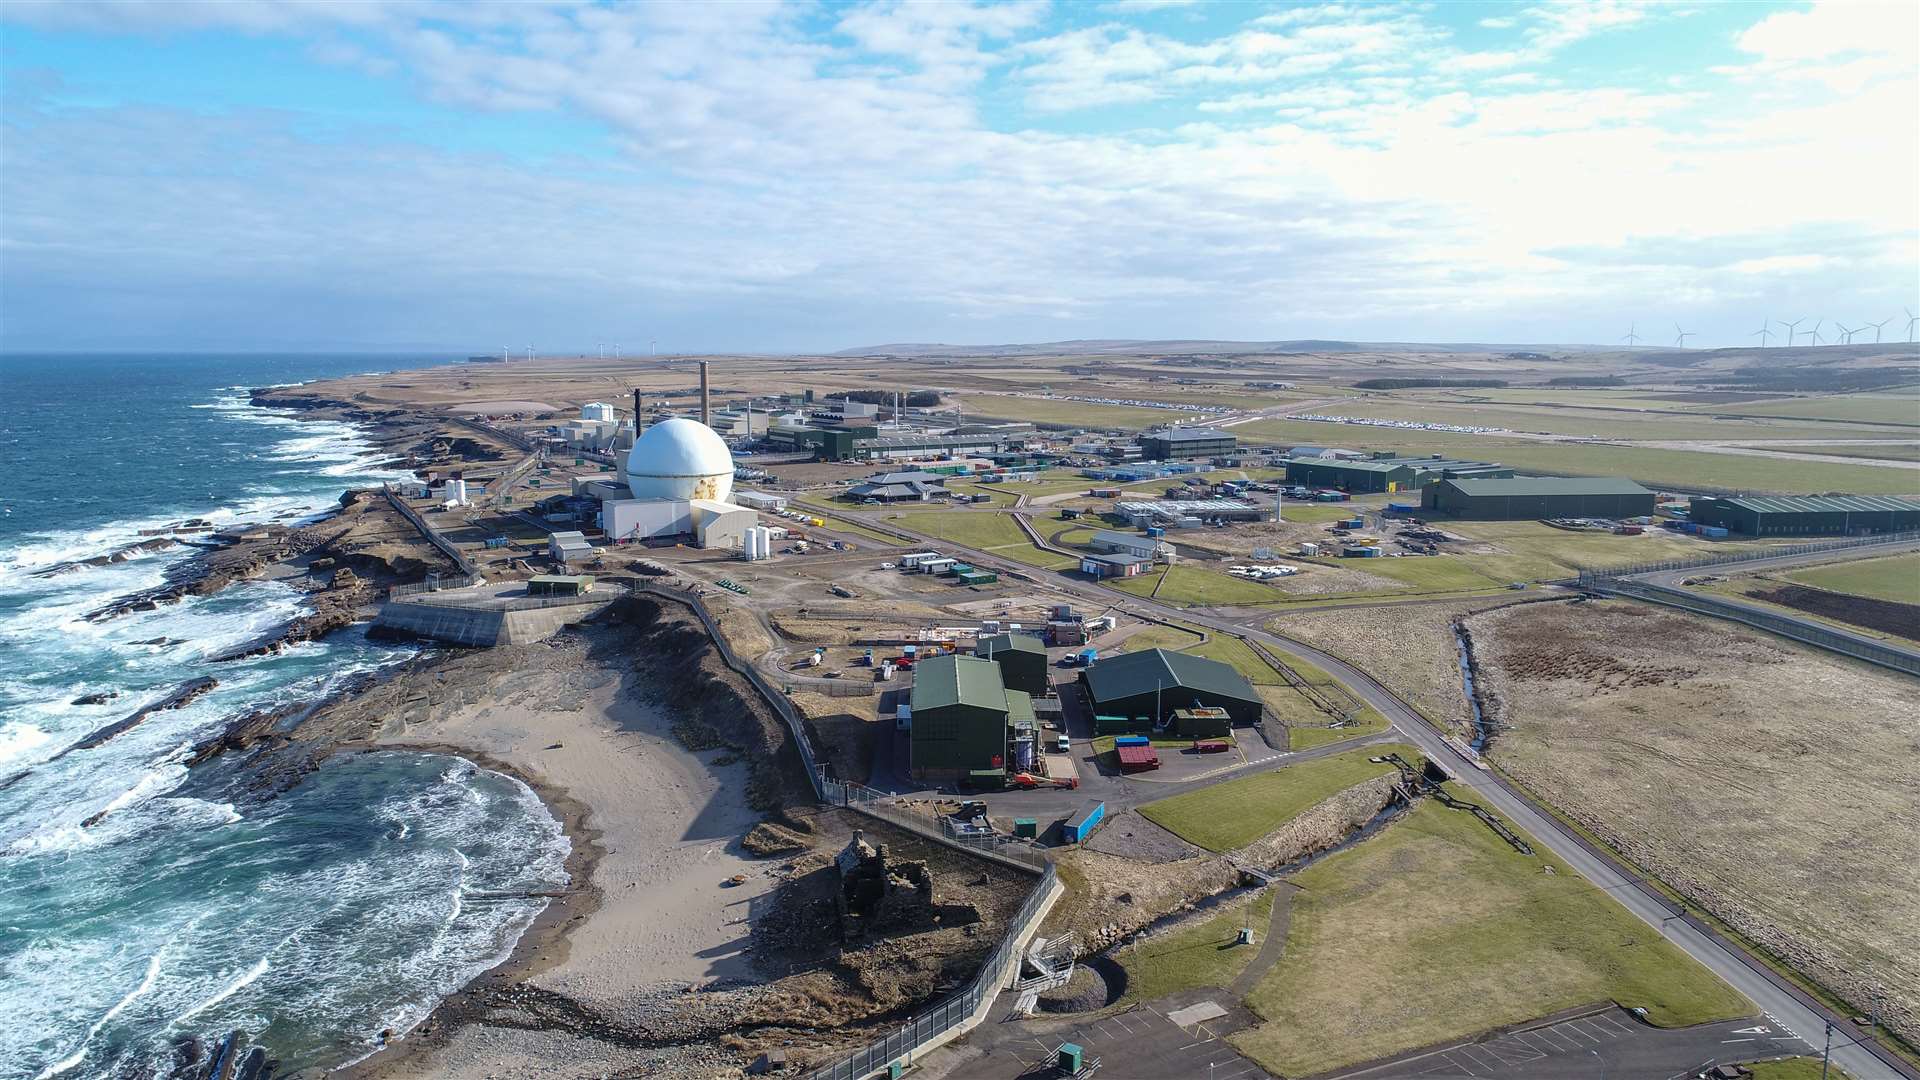 Radiation levels close to Dounreay were slightly higher than in previous years but well within legal safety limits.